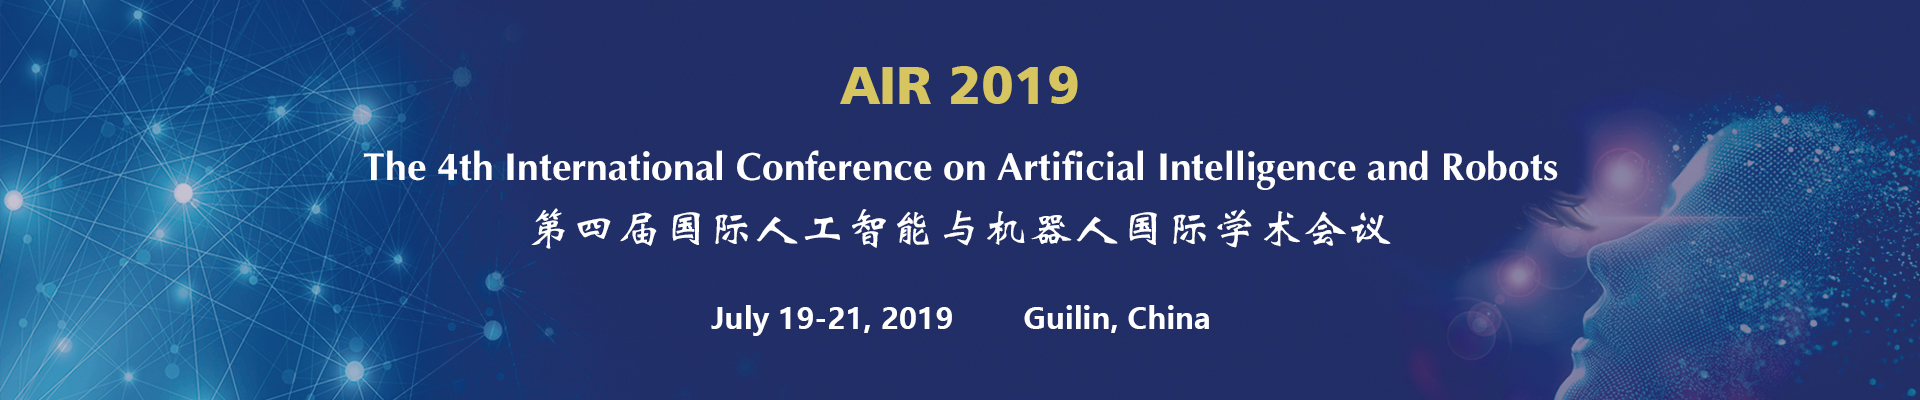 The 4th International Conference on Artificial Intelligence and Robots (AIR 2019), Guilin, Guangxi, China